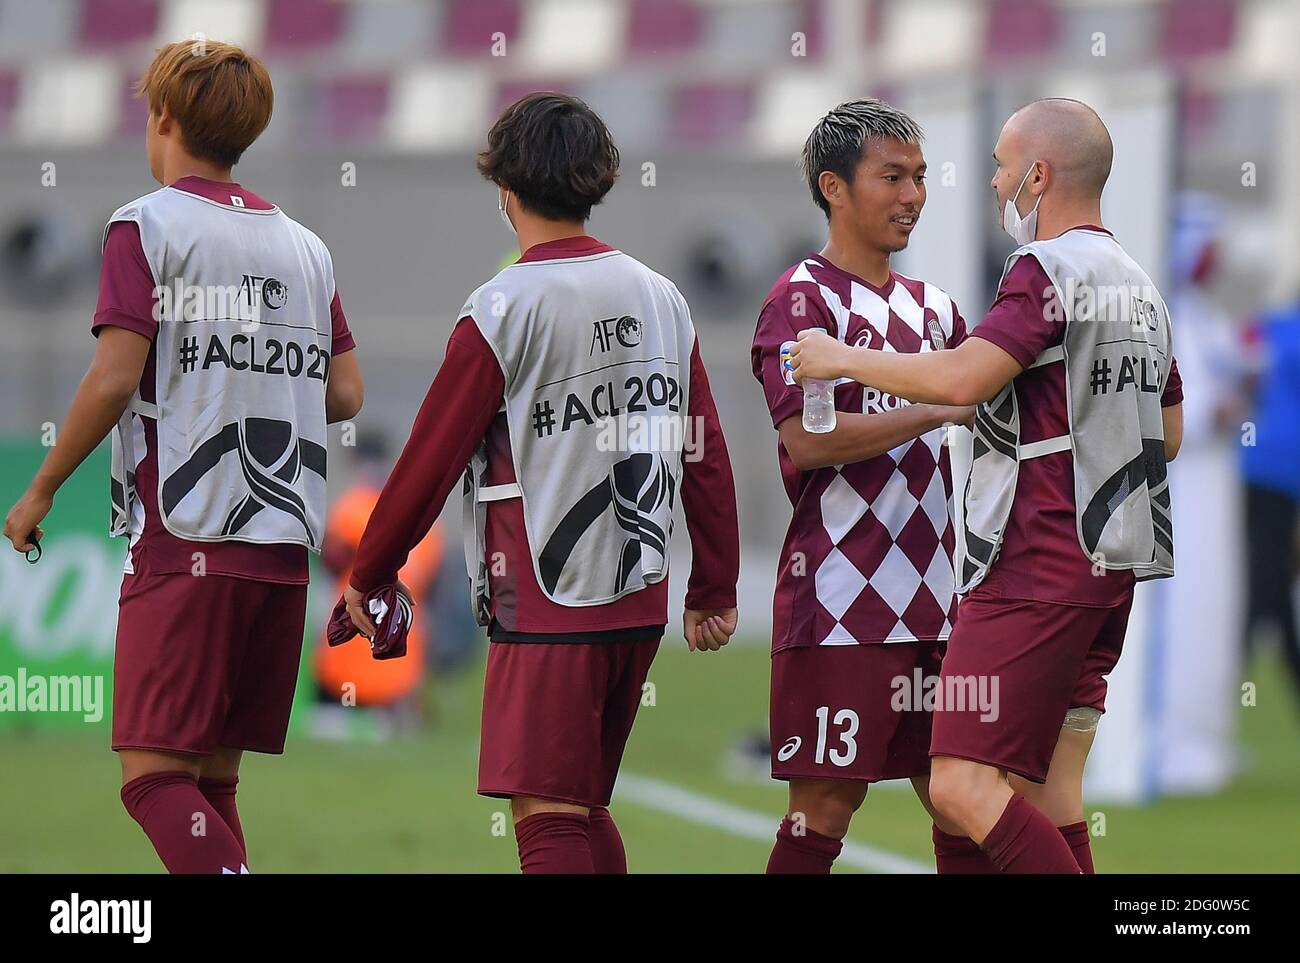 Doha, Qatar. 7th Dec, 2020. Andres Iniesta (1st R) of Vissel Kobe reacts with teammates after winning the round 16 match of the AFC Champions League between Shanghai SIPG FC of China and Vissel Kobe of Japan in Doha, Qatar, Dec. 7, 2020. Credit: Nikku/Xinhua/Alamy Live News Stock Photo